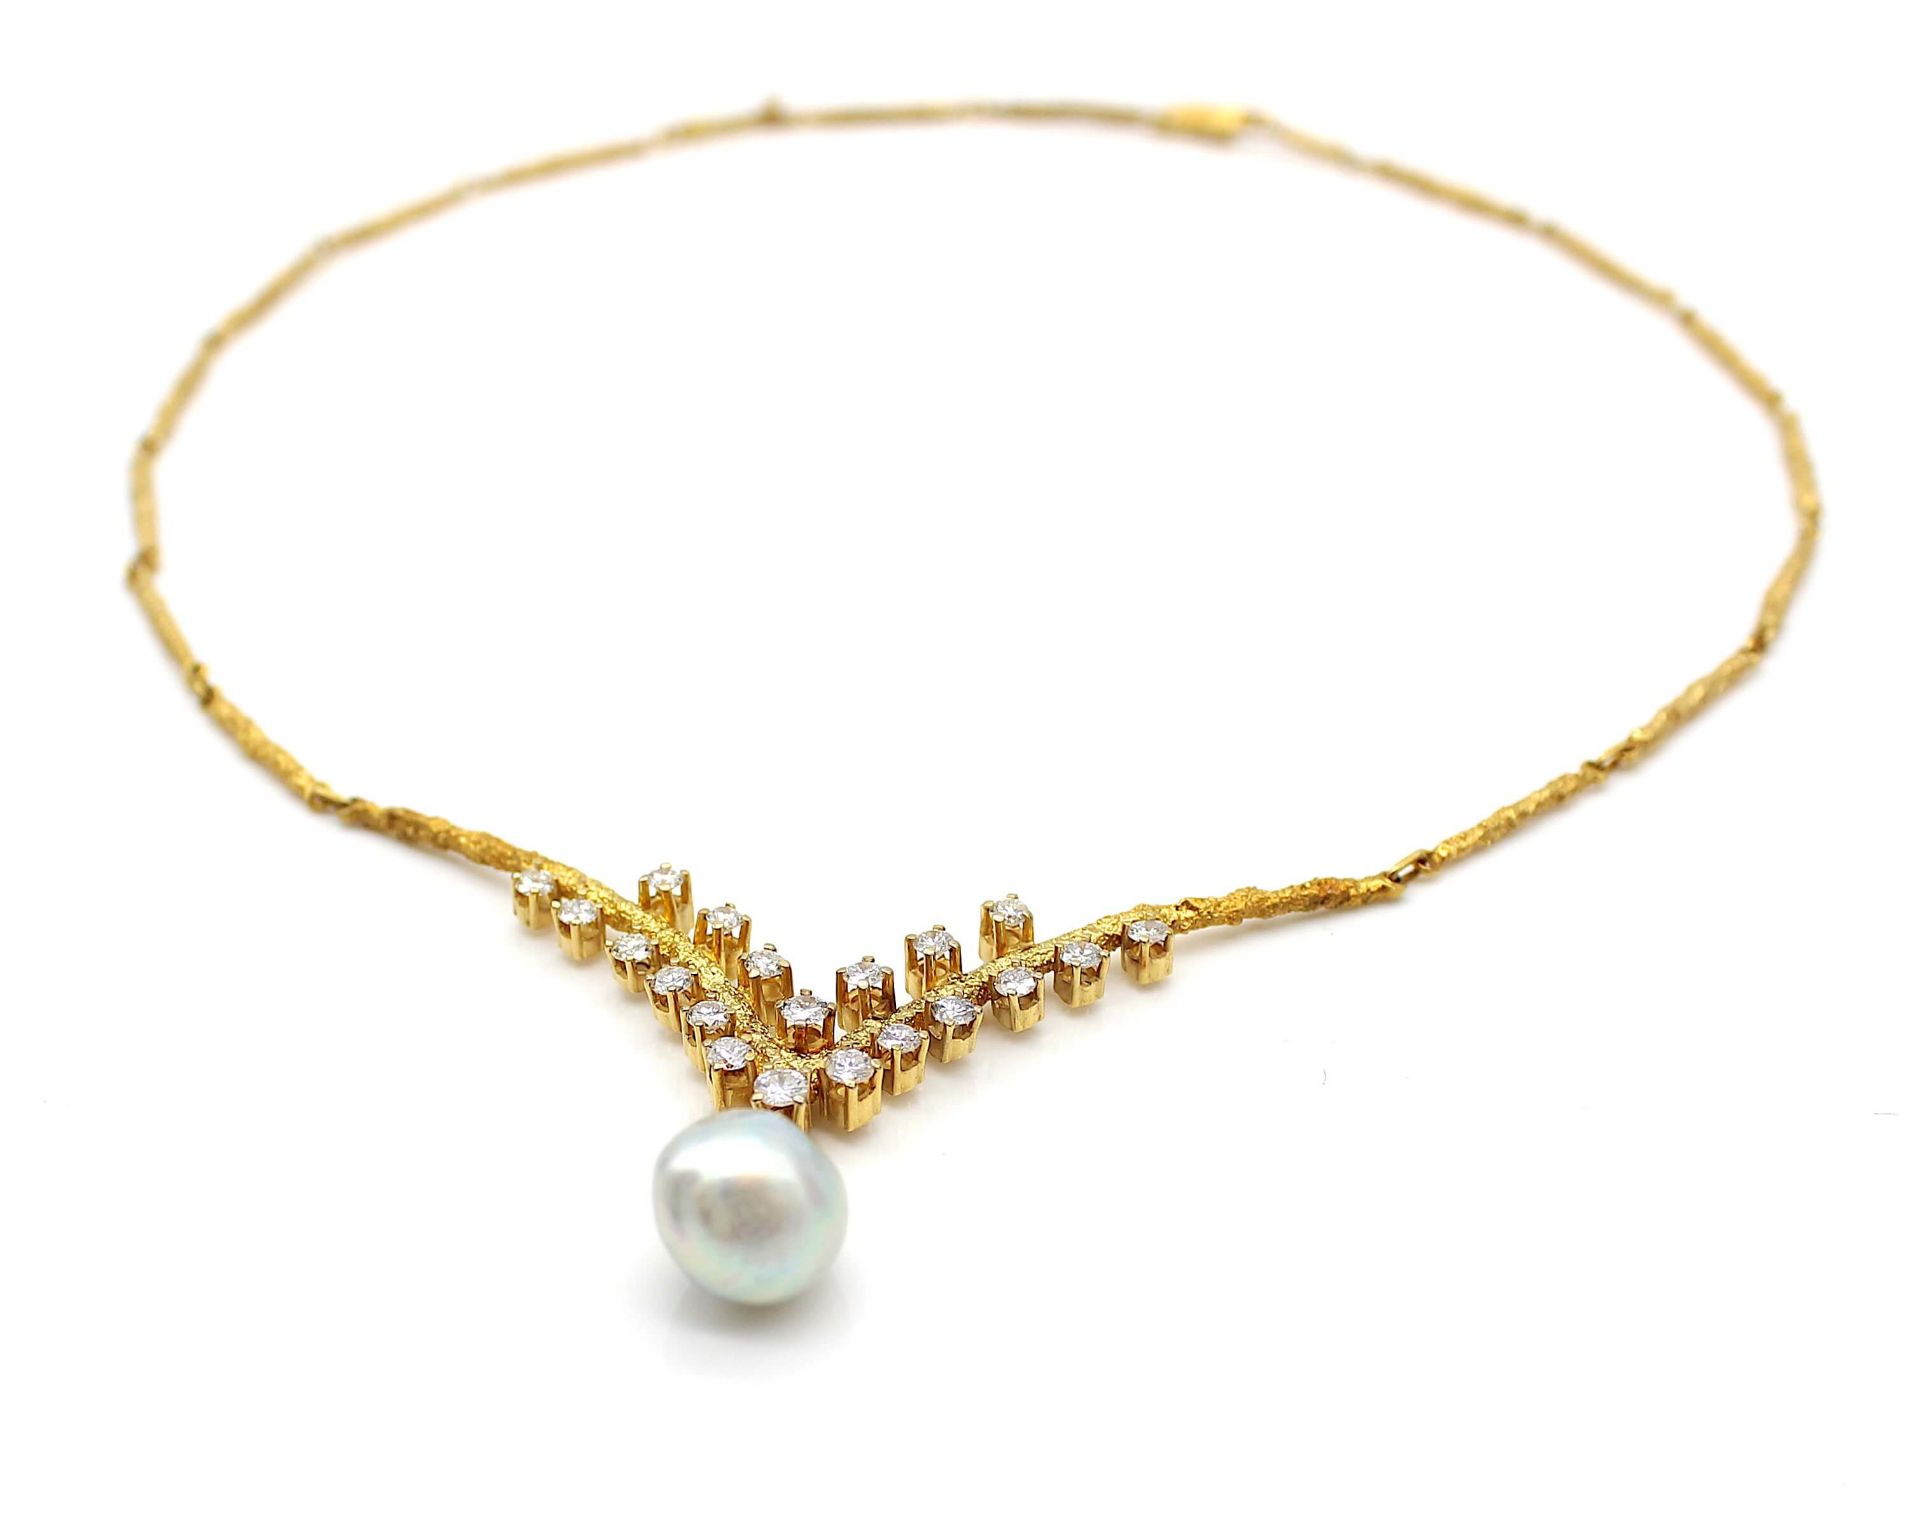 Necklace in 585 gold with 20 brilliants, total approx. 1.4 ct. with a high degree of colour and